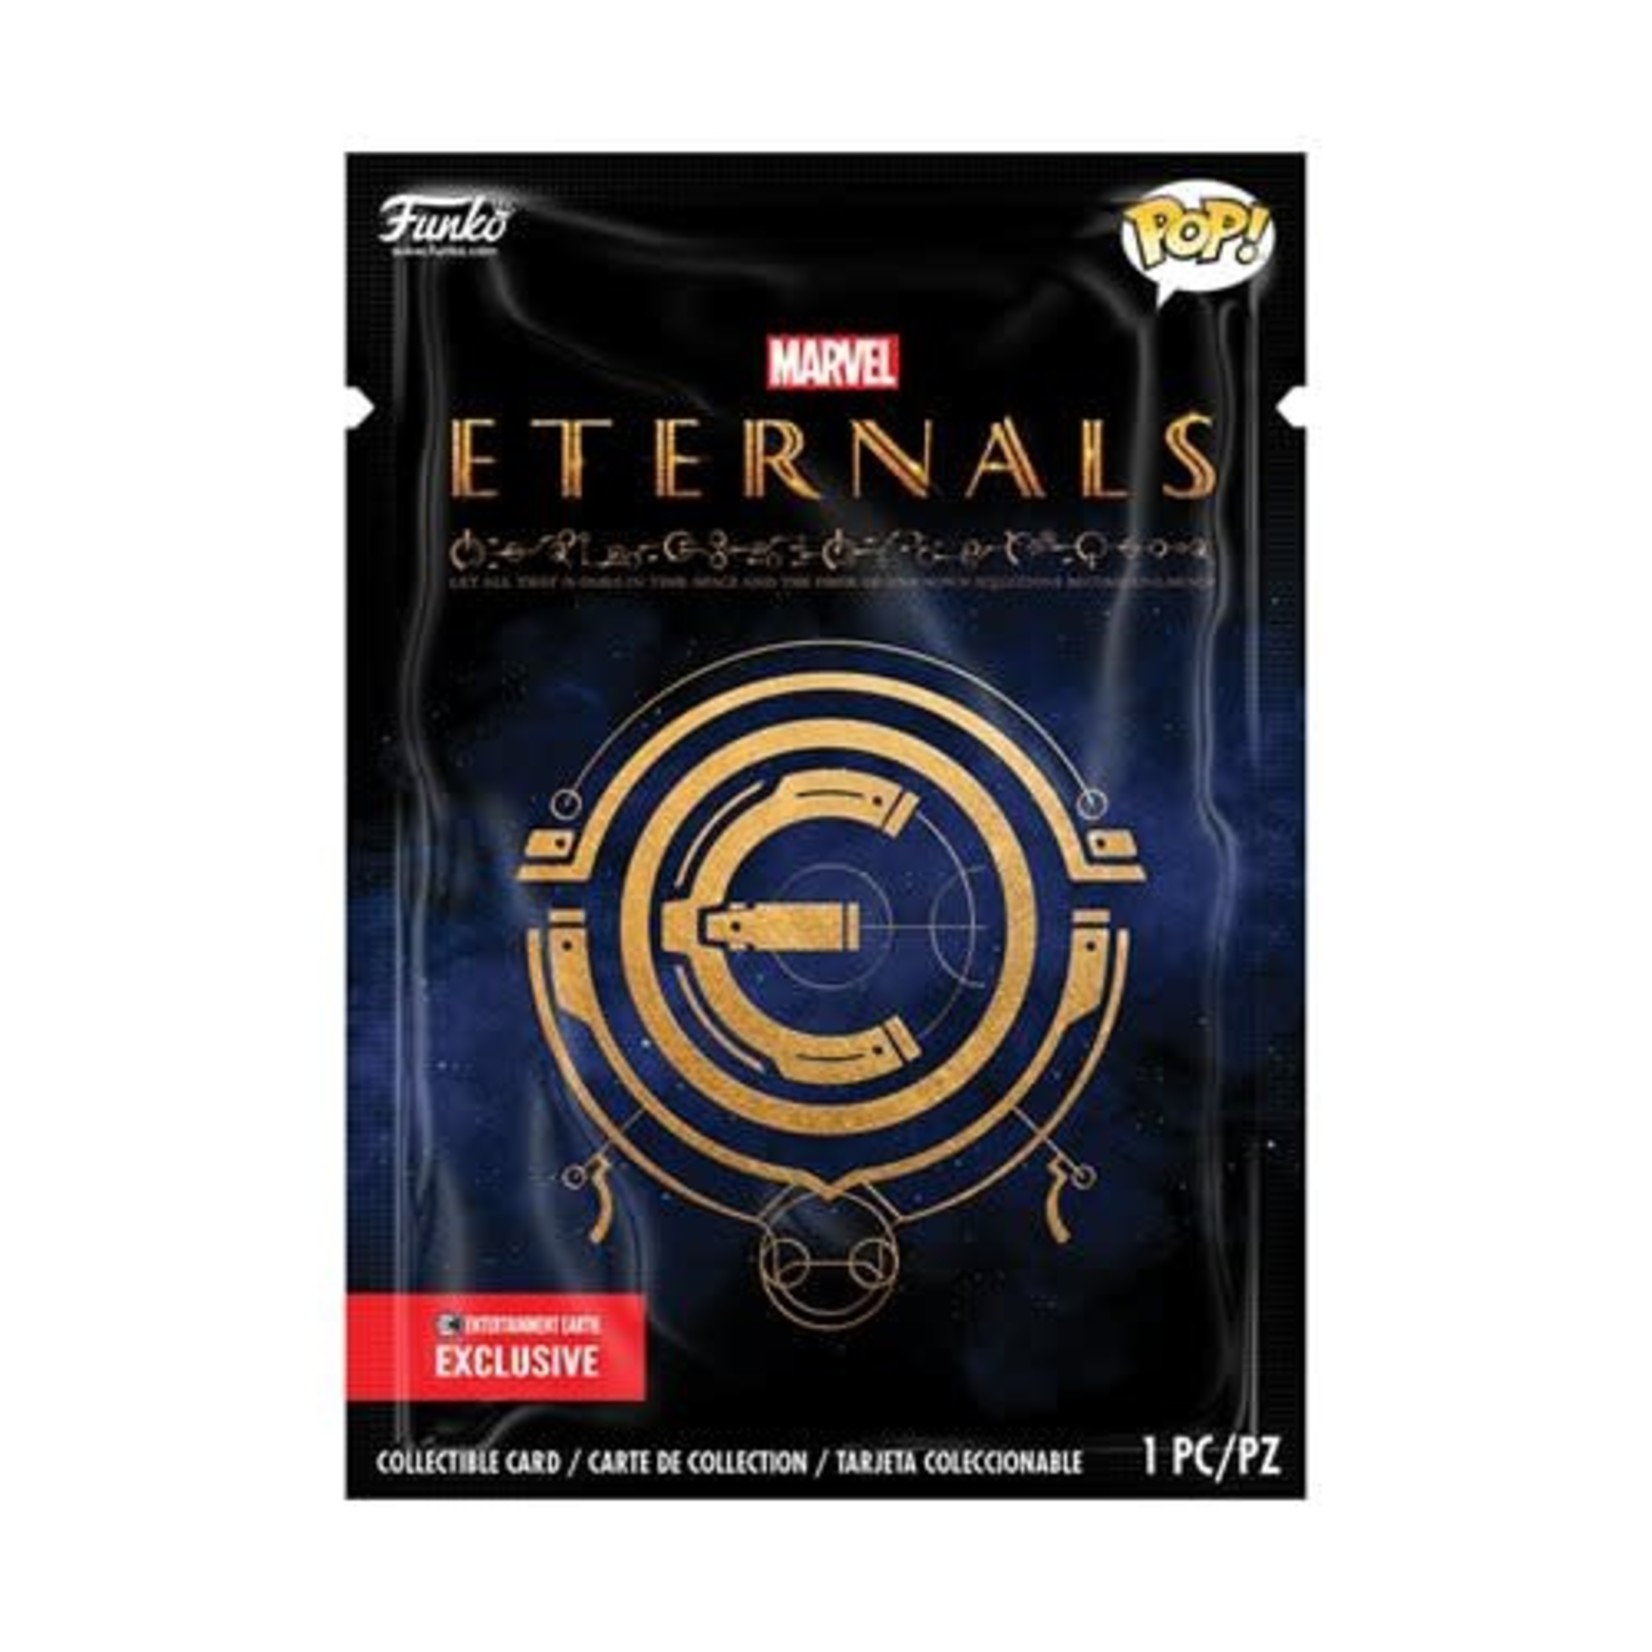 Funko Eternals Sersi Pop! Vinyl Figure with Collectible Card - Entertainment Earth Exclusive